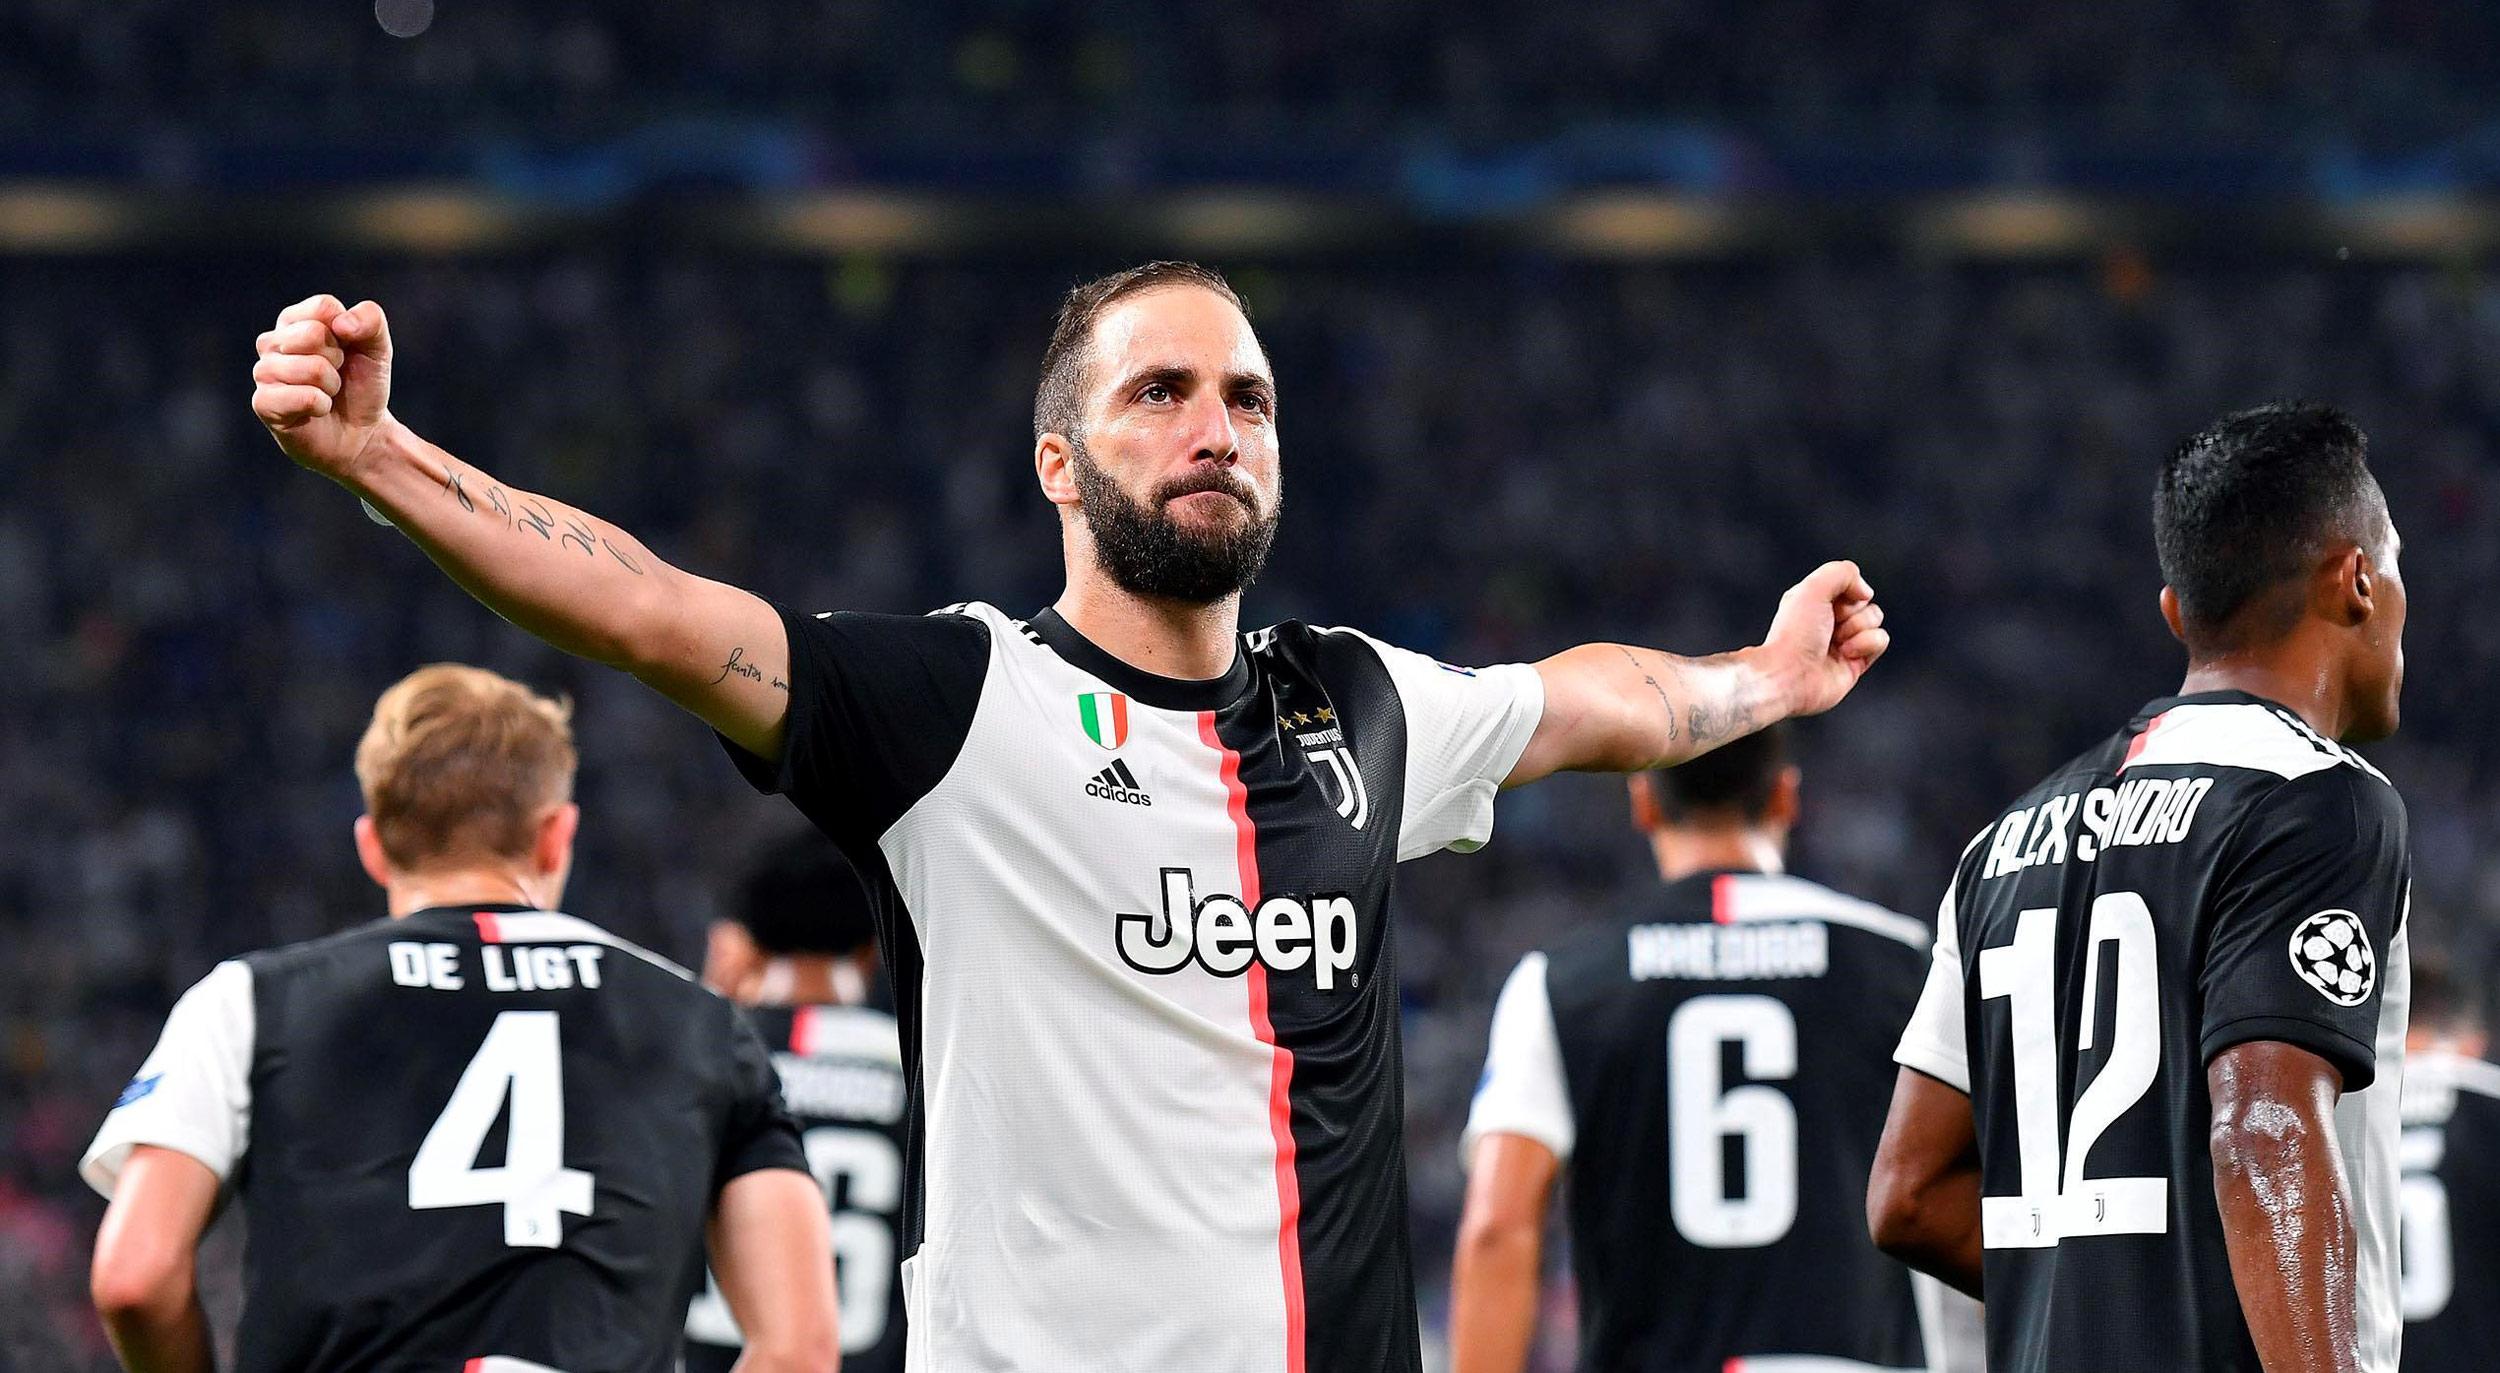 This summer, Italian football is set to bid farewell to Gonzalo Higuain, who broke the Serie A goalscoring record with 36 goals during the 2015-16 season